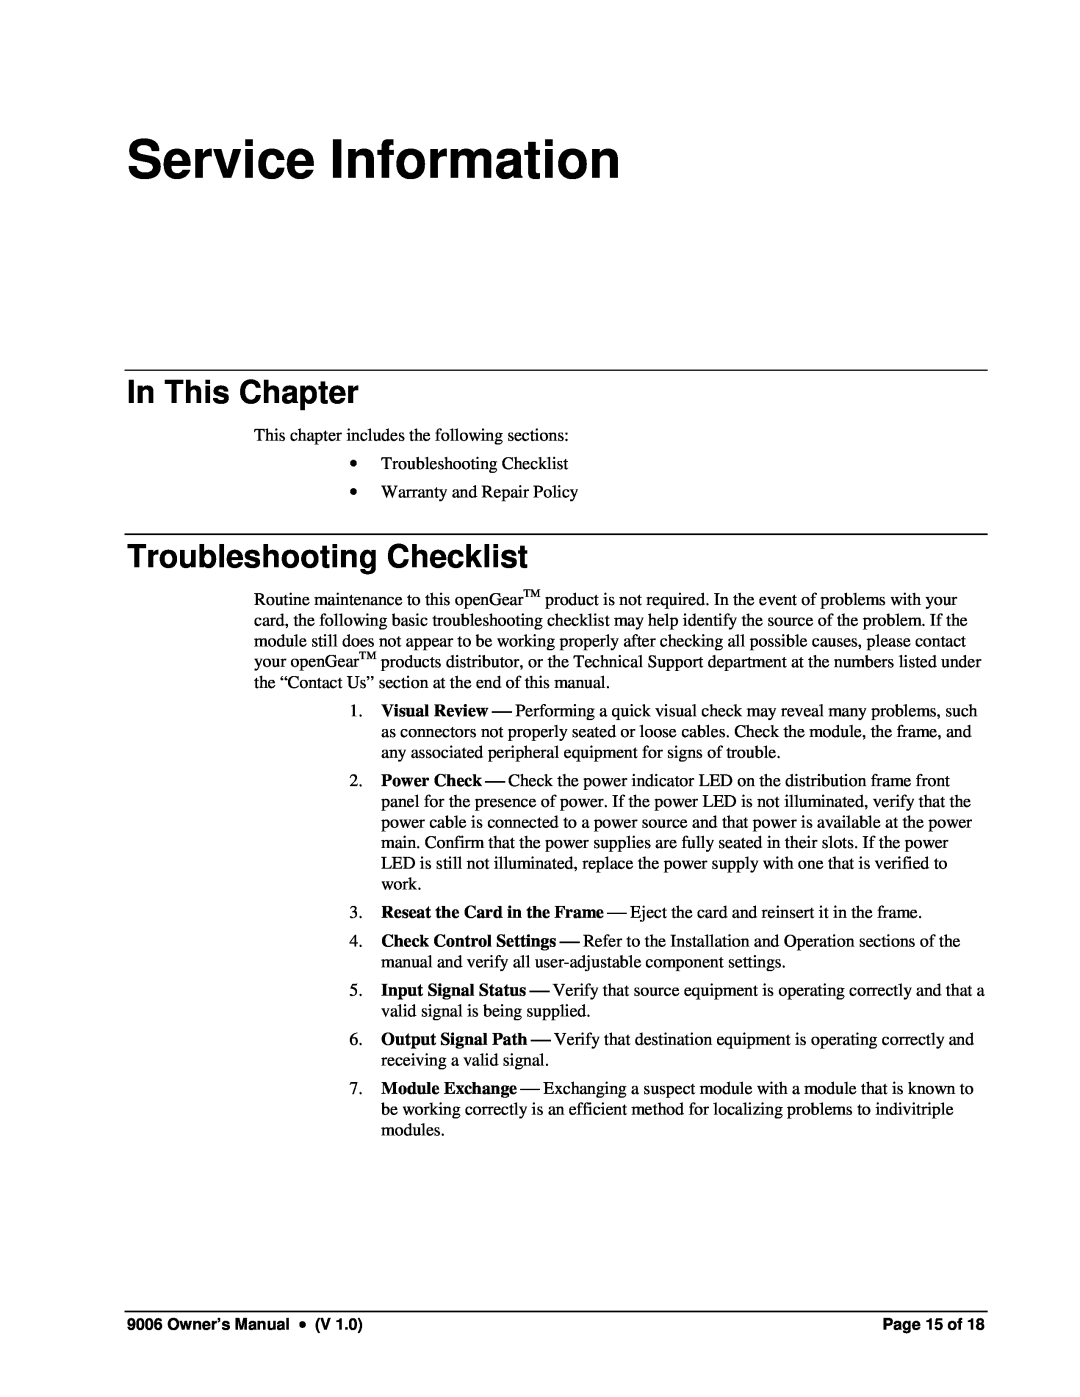 Cobalt Networks 9006 owner manual Service Information, Troubleshooting Checklist, In This Chapter 